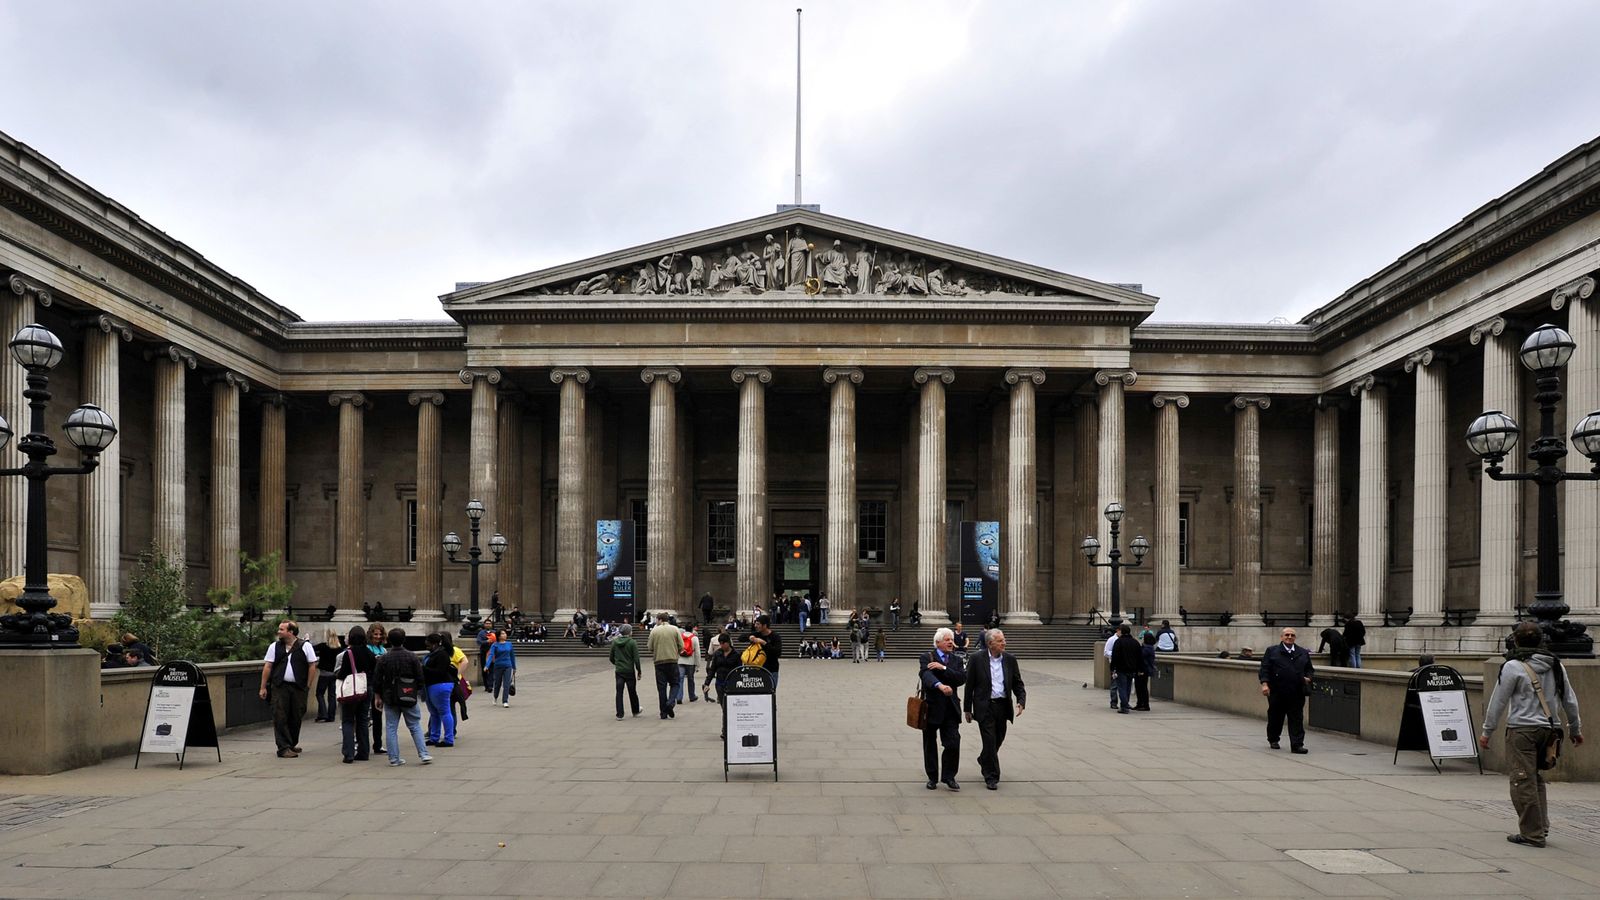 British Museum: Staff member sacked after items 'missing, stolen or damaged'